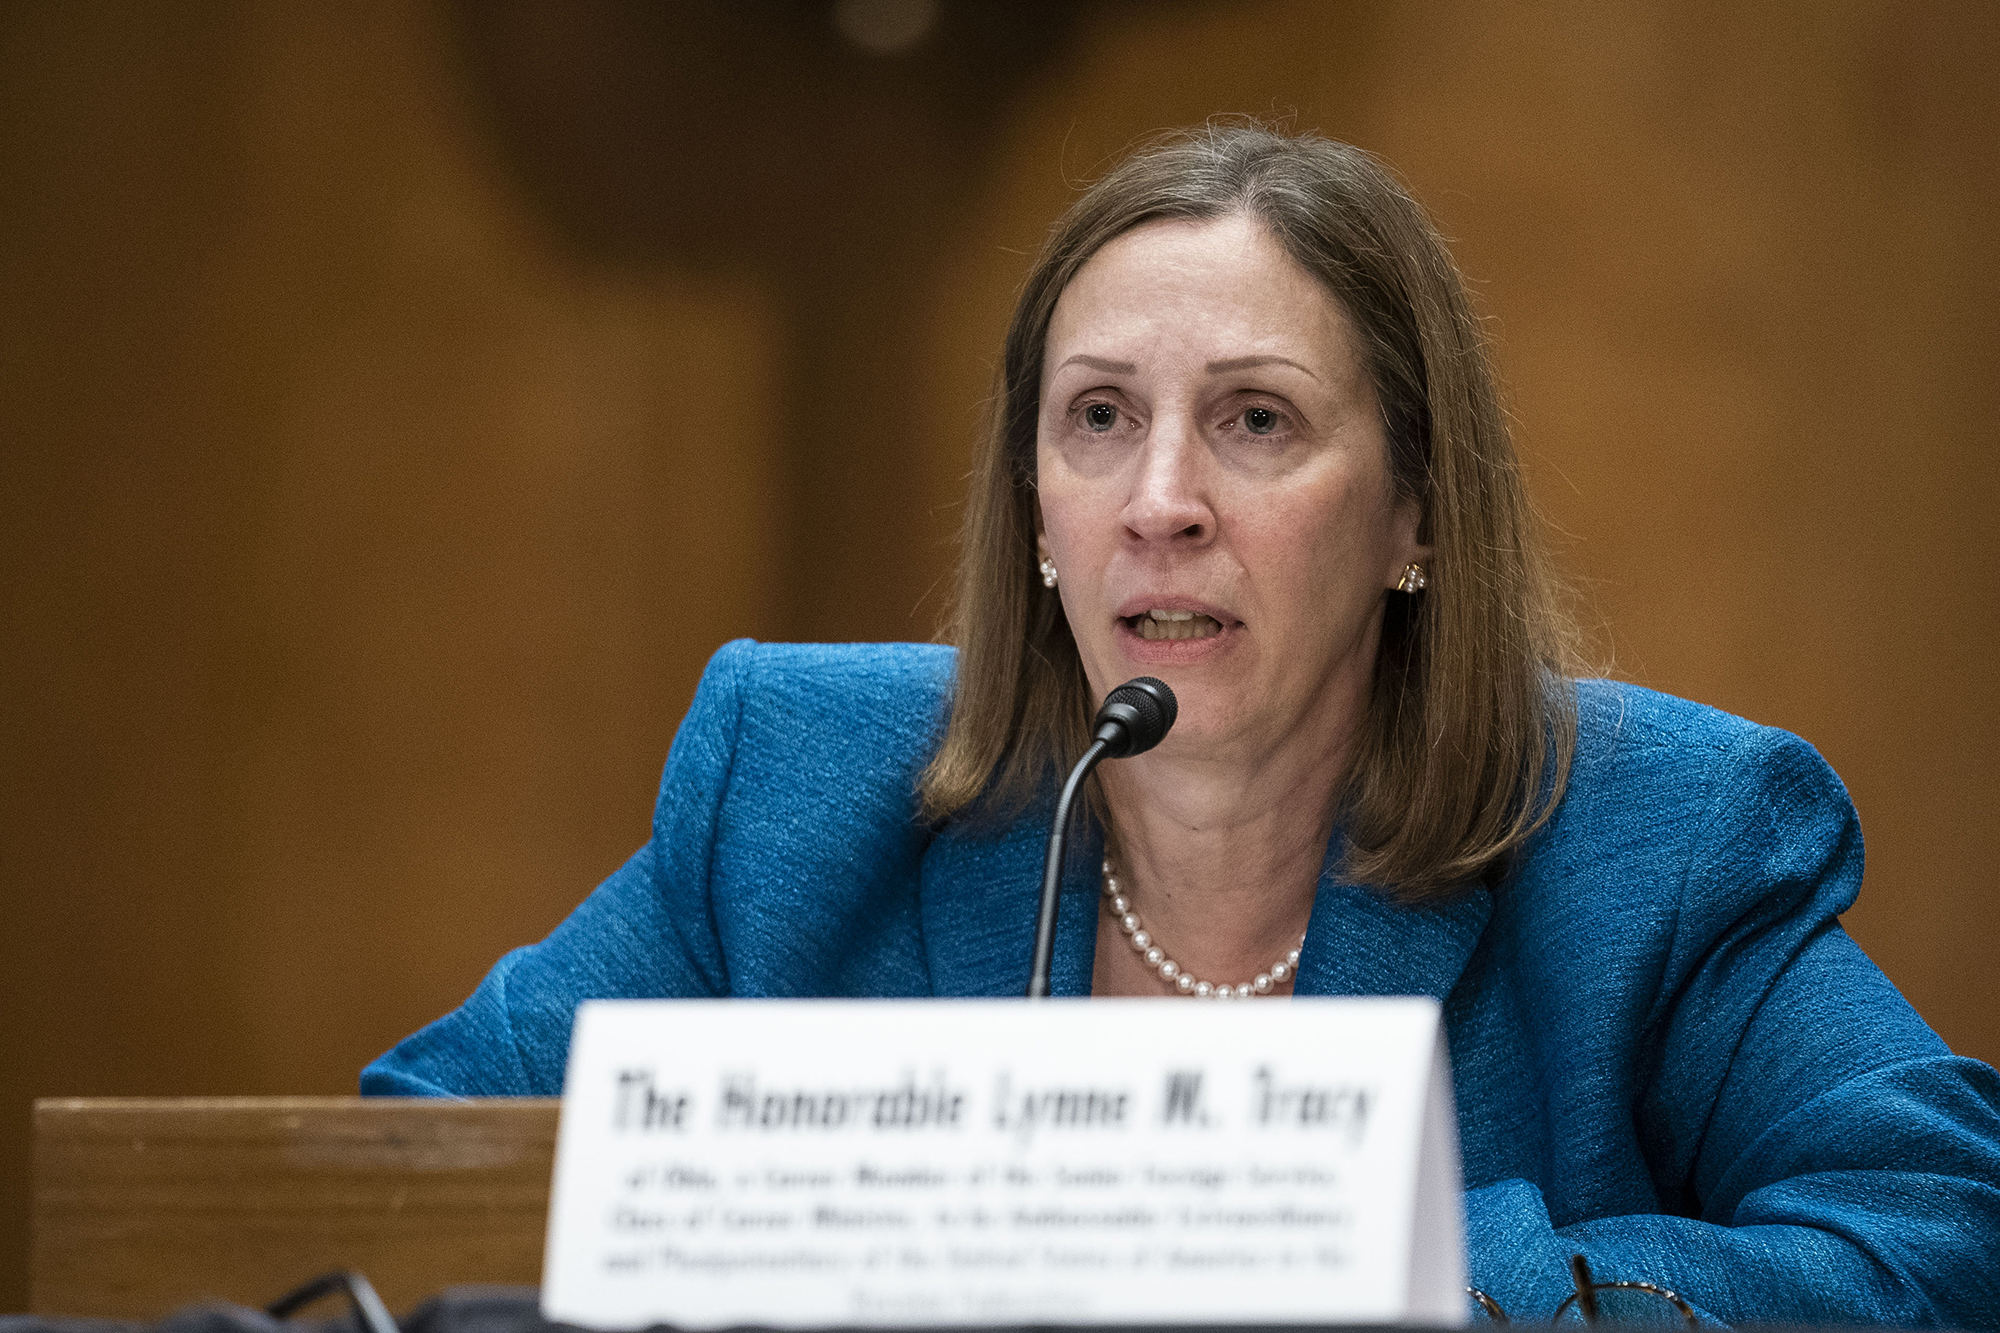 Lynne M. Tracy testifies before the Senate Foreign Relations Committee to be Ambassador to the Russian Federation on Capitol Hill in Washington, D.C., November 30.